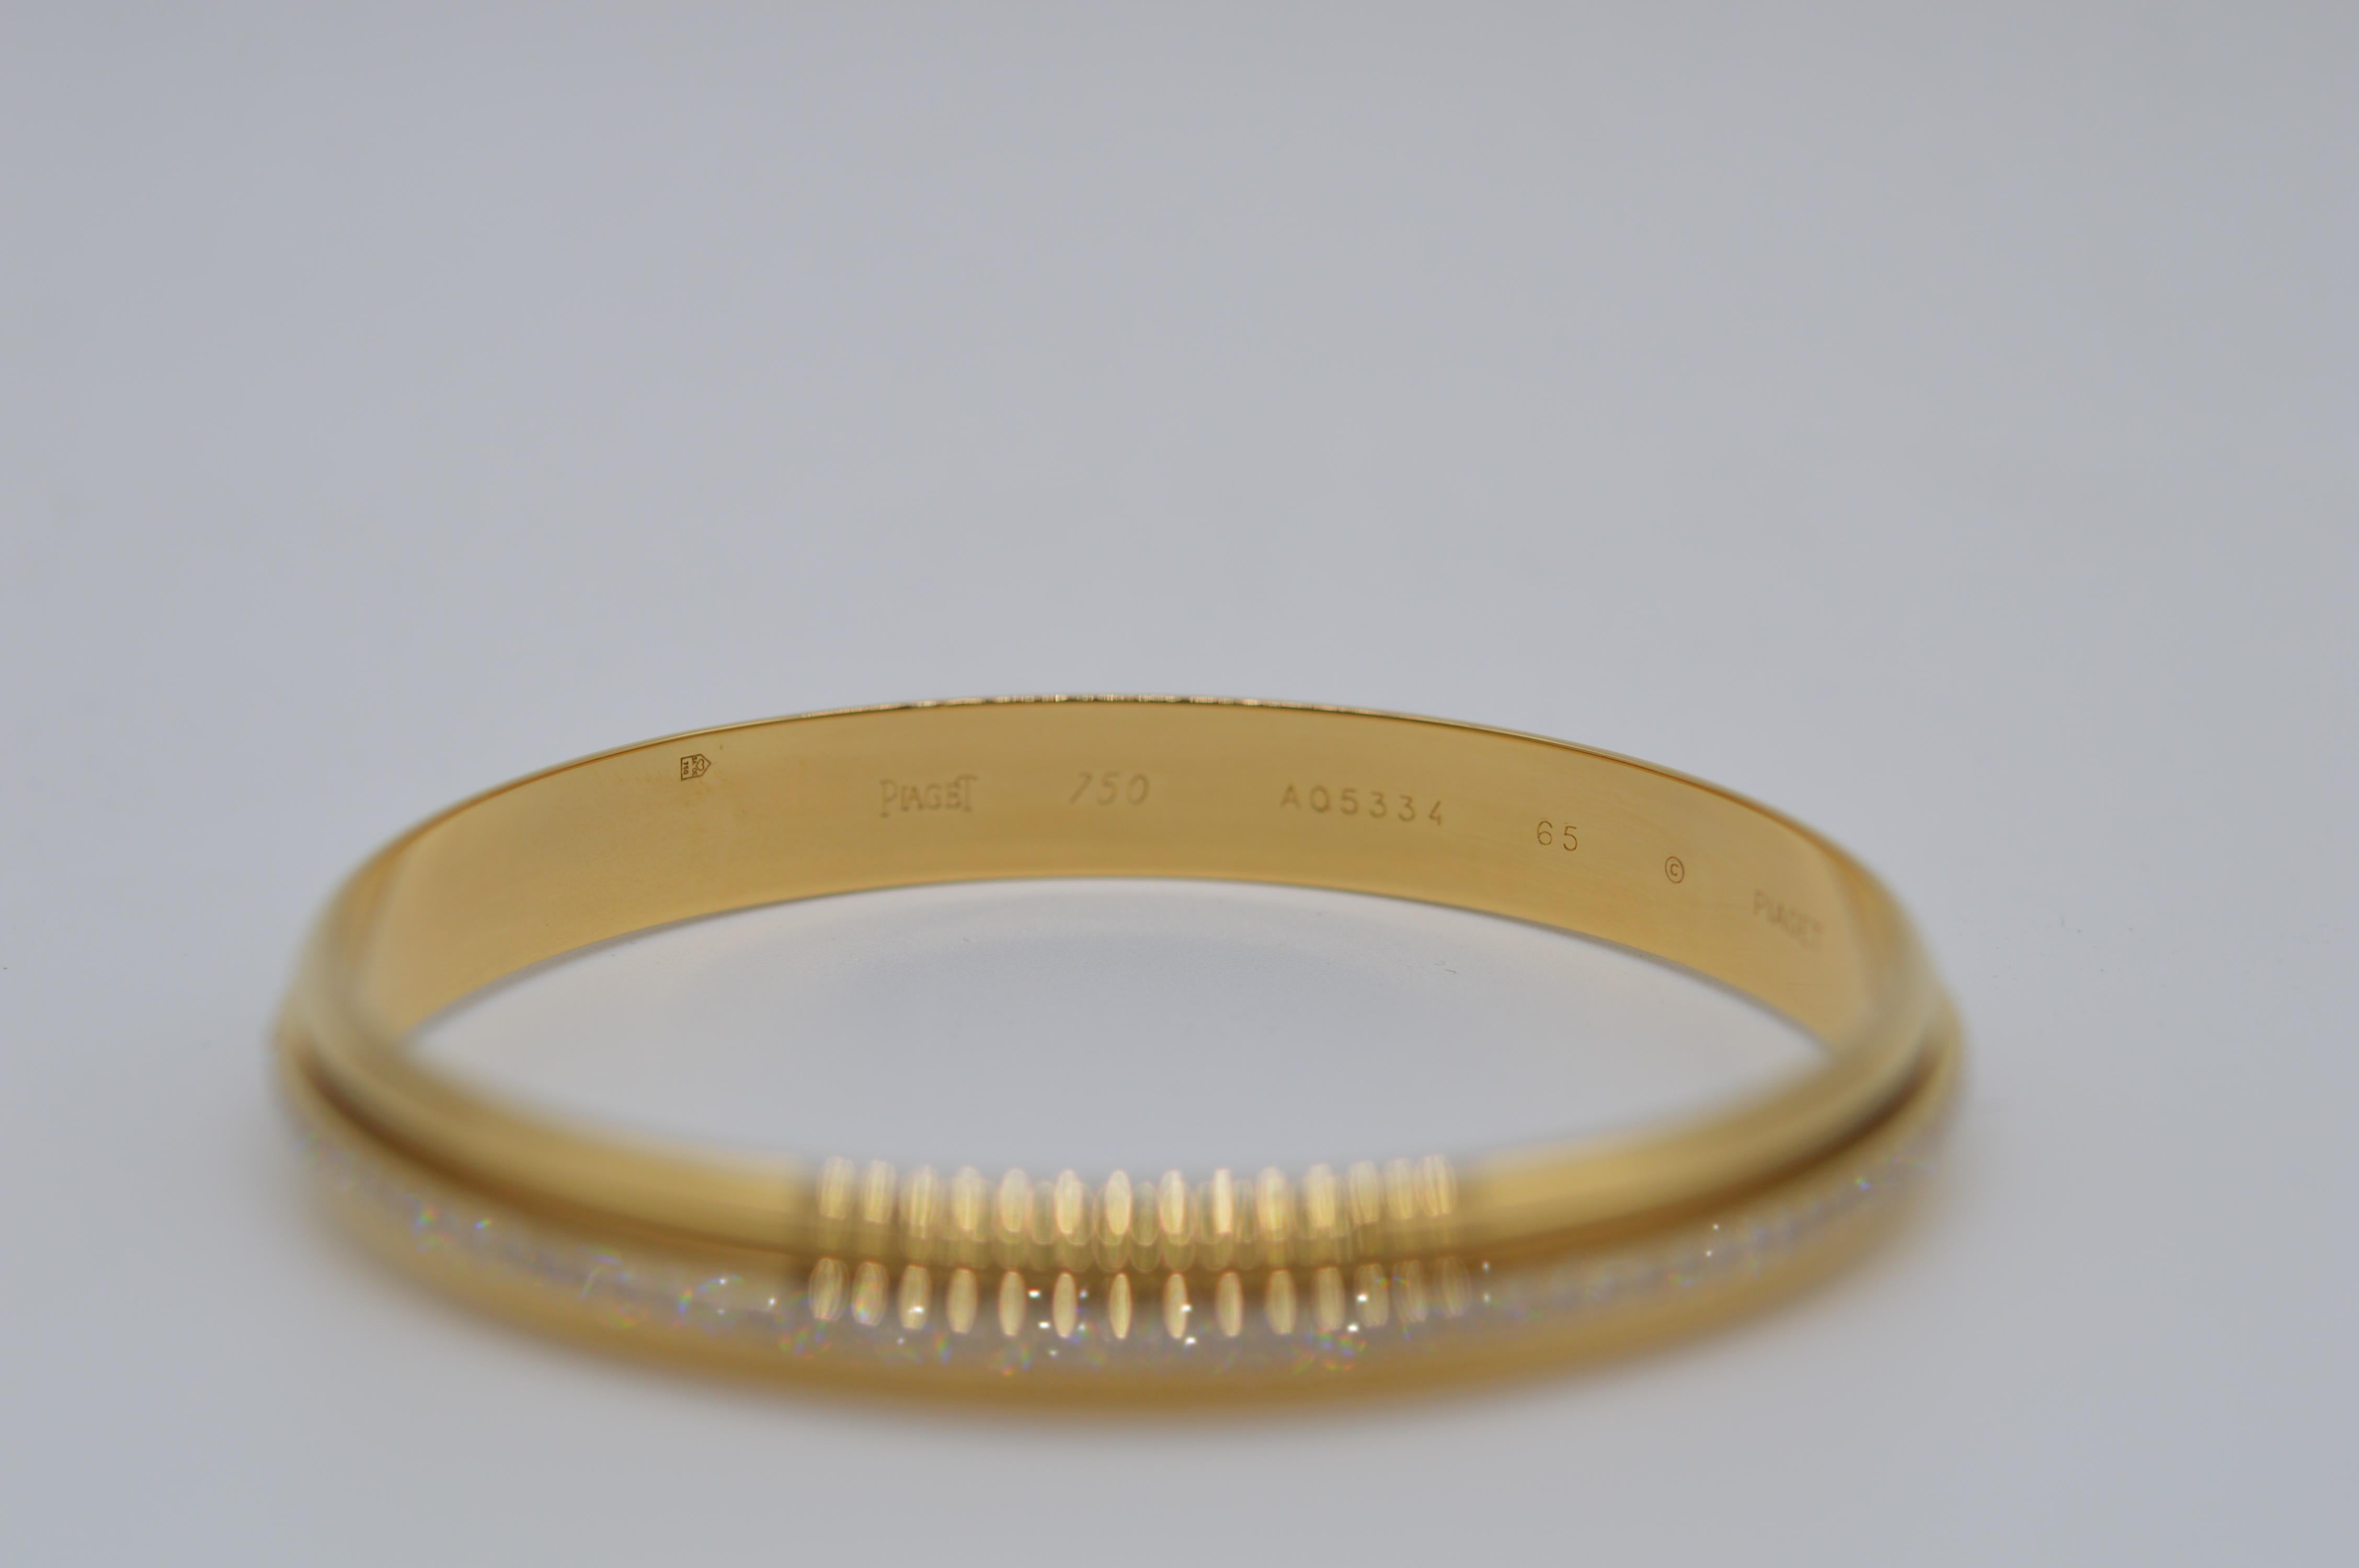 Piaget Possession Bangle Unworn
Size 65
18K Yellow Gold
Weight 48.2 grams
Diamonds Setting
Set with 116 Round Diamonds for a total weight of 1.78 carats
Vintage unworn
From 1990
